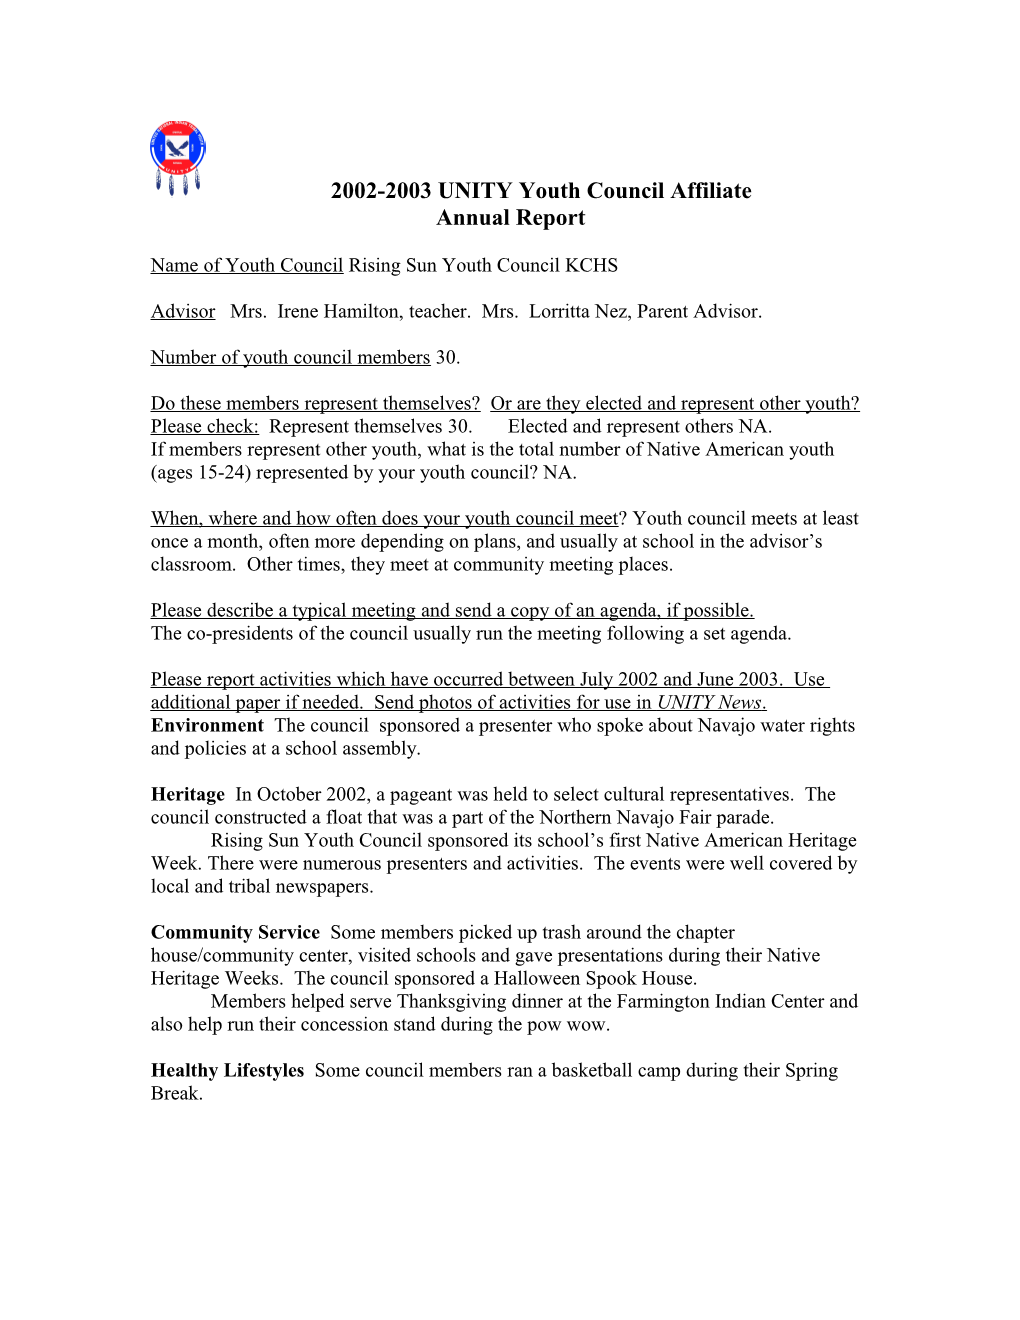 1997-98 UNITY Youth Council Affiliates